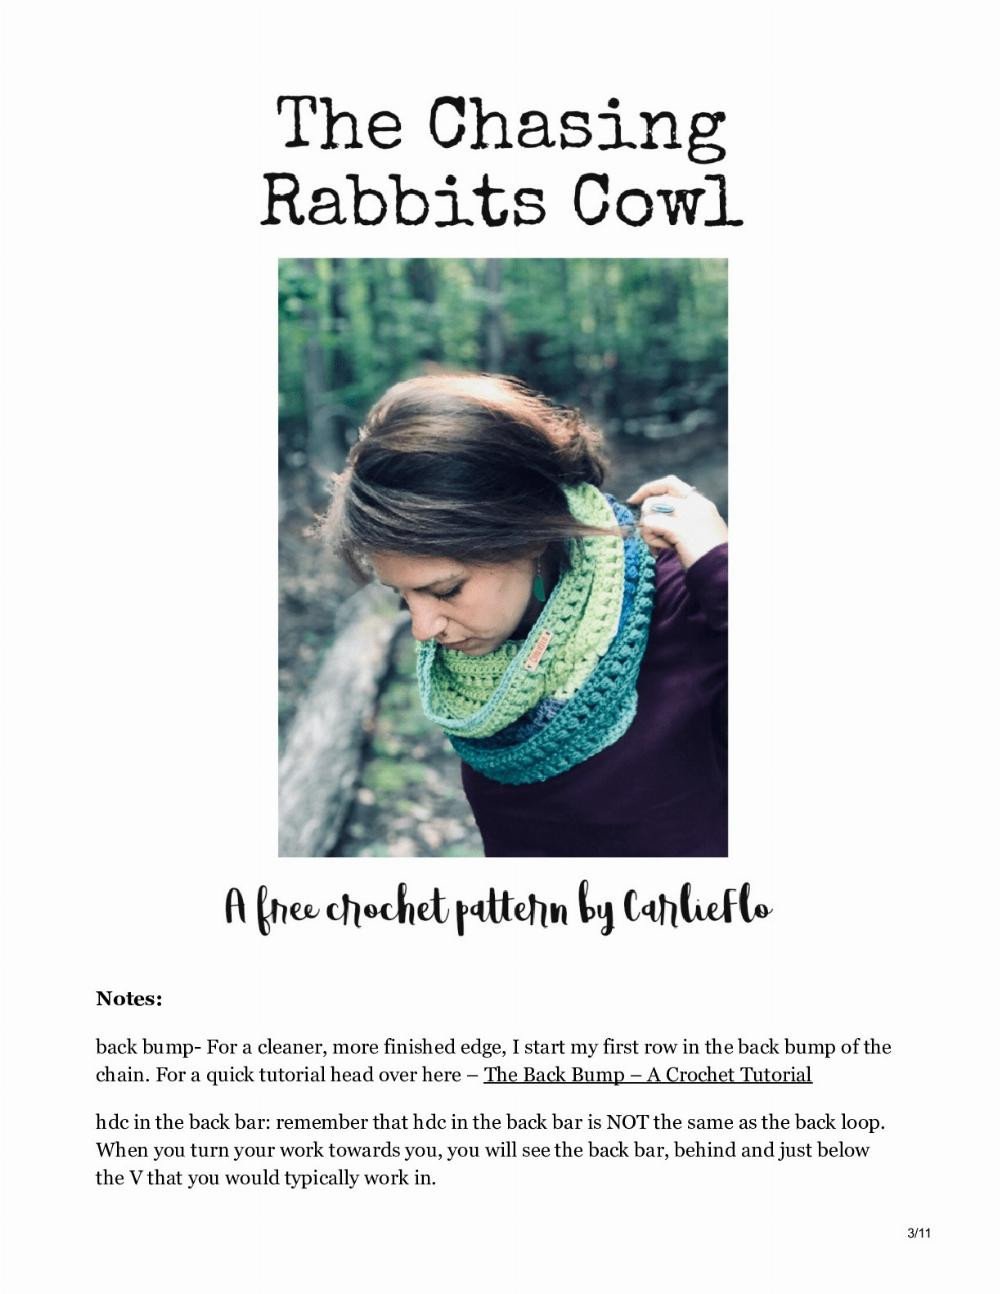 The Chasing Rabbits Cowl – A free crochet pattern